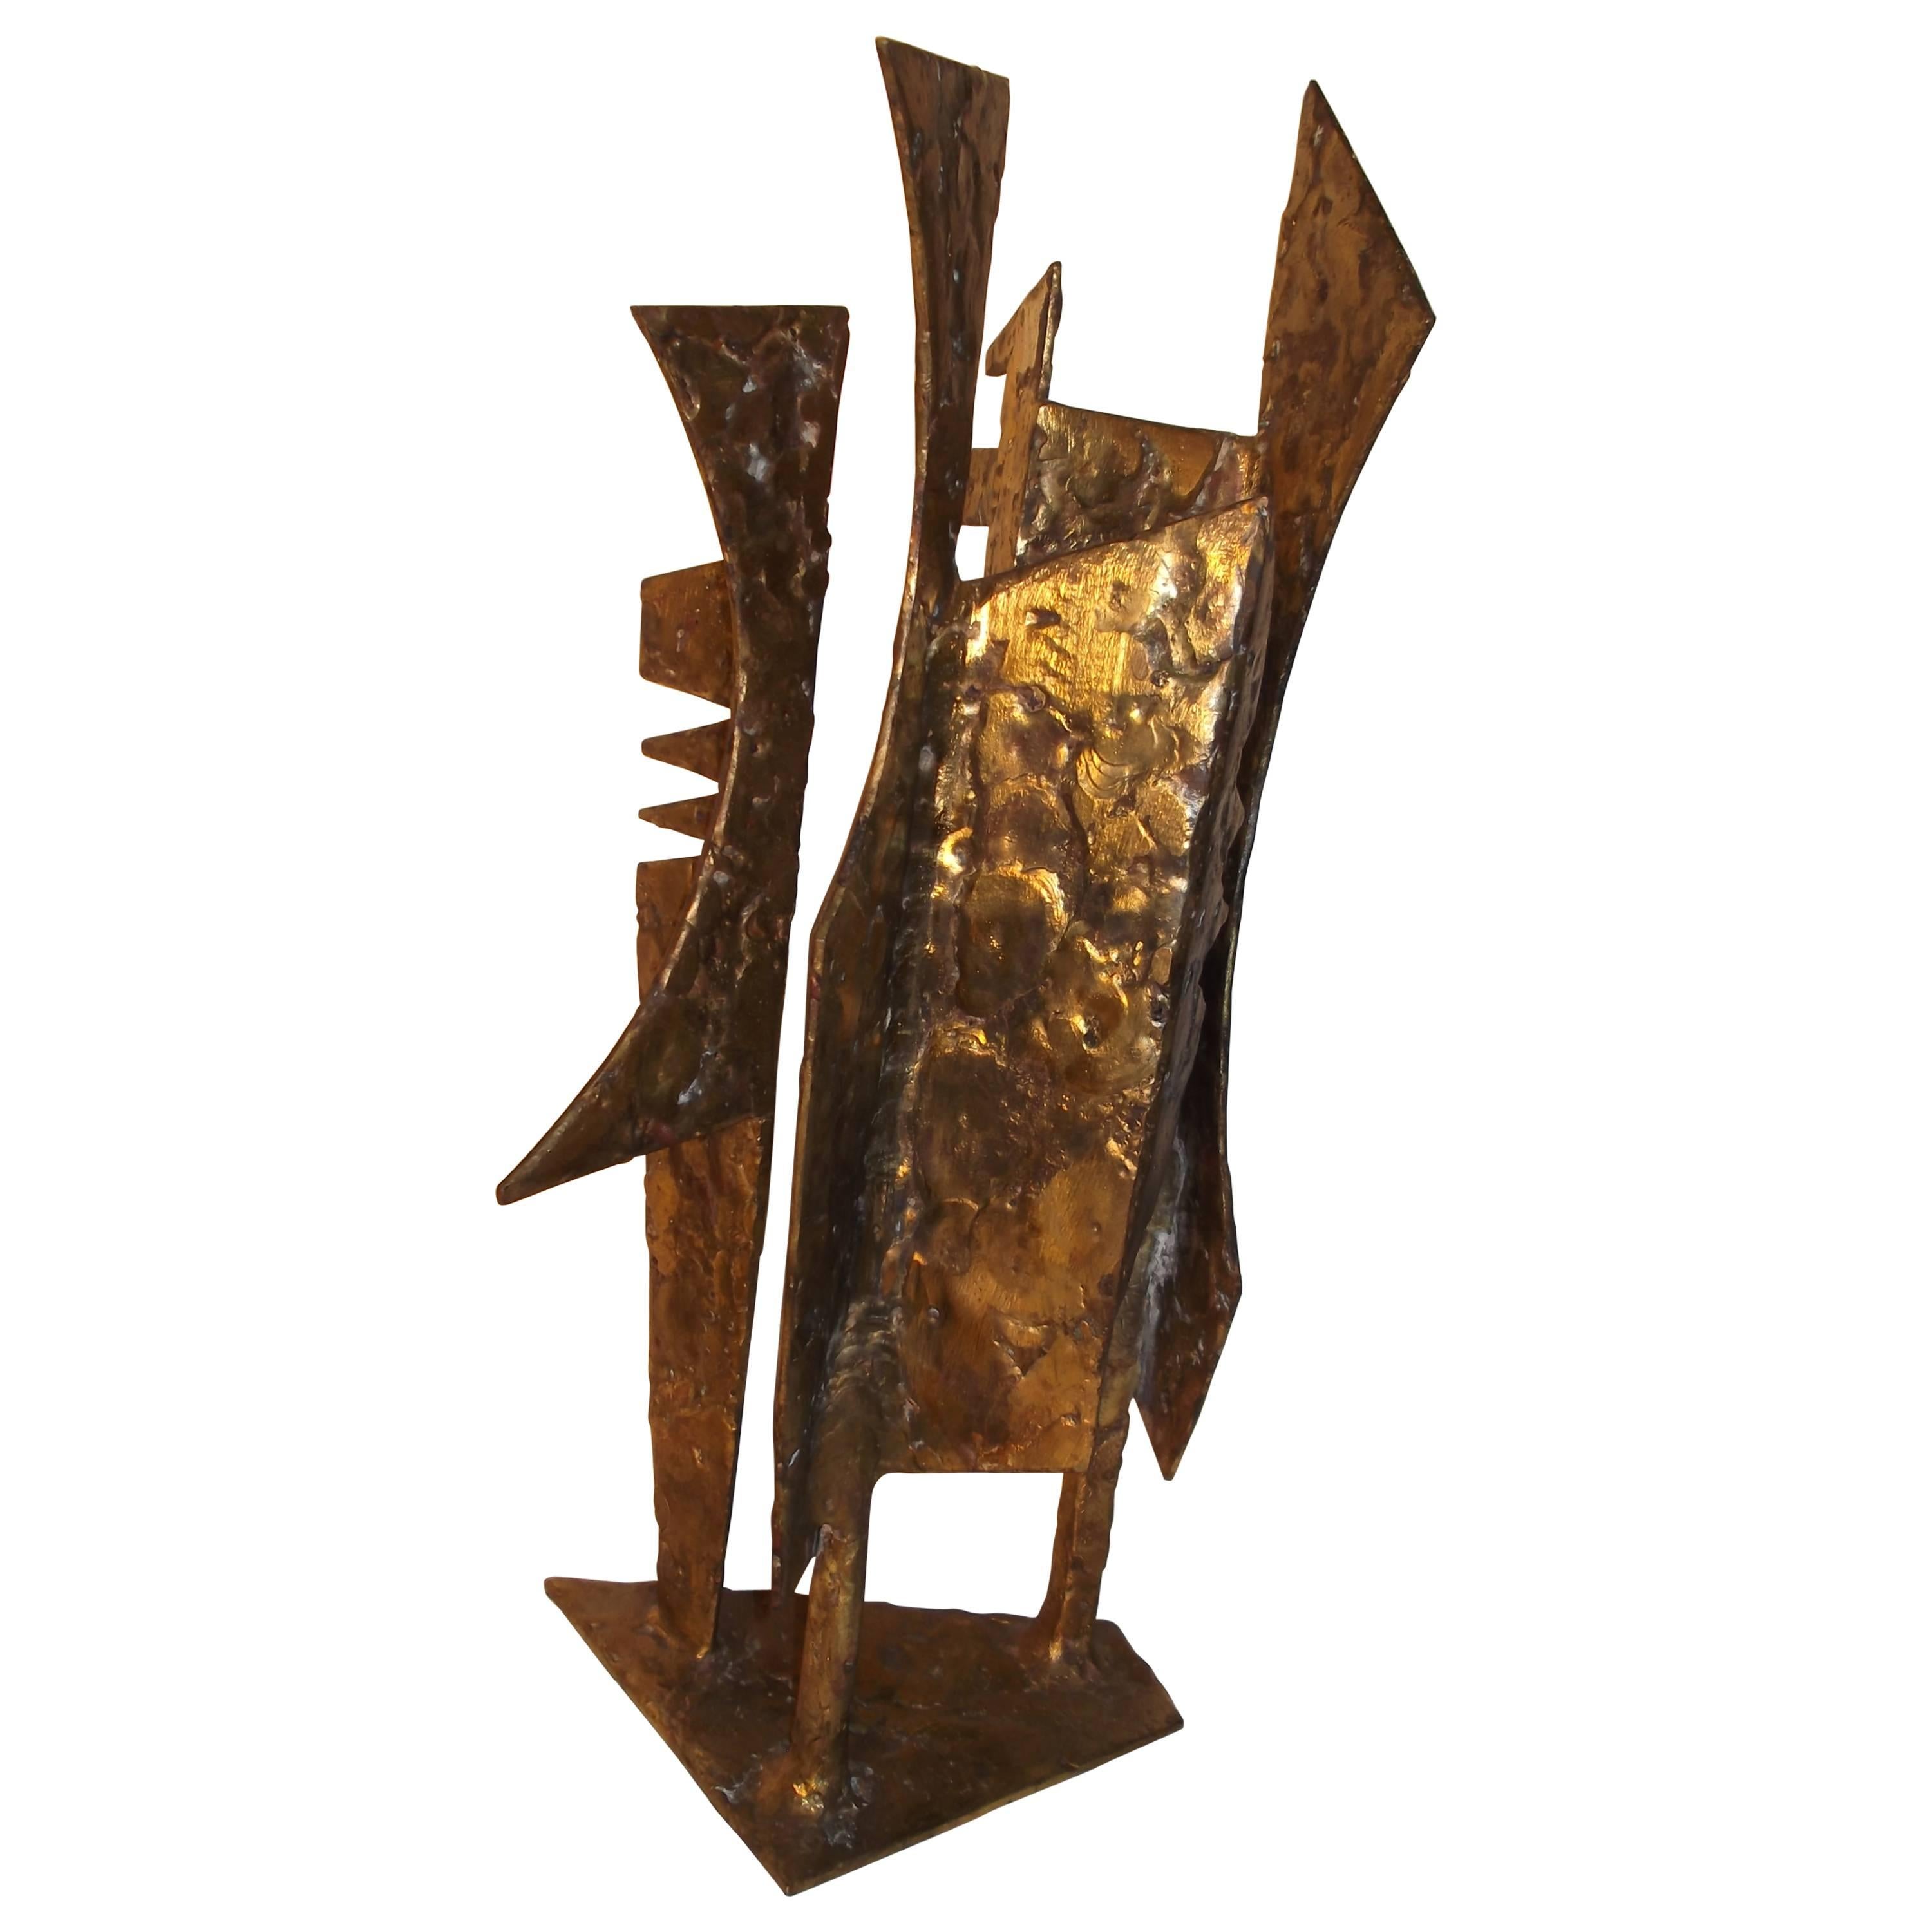 "Sculpture 95" Abstract Modern Art Bronzed Welded Iron by J. McVicker For Sale